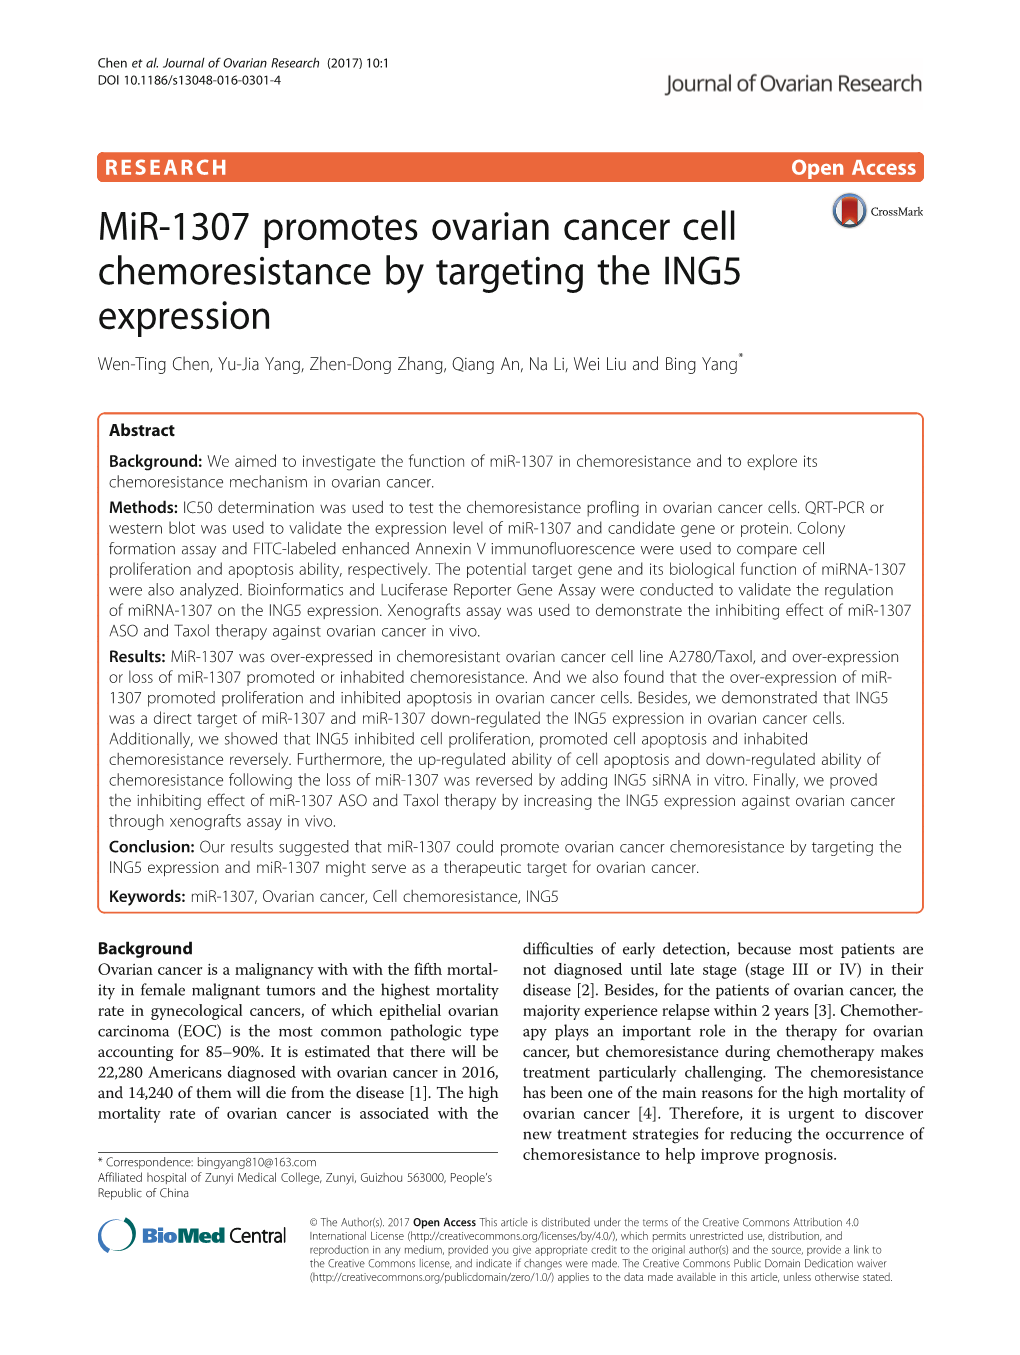 Mir-1307 Promotes Ovarian Cancer Cell Chemoresistance by Targeting